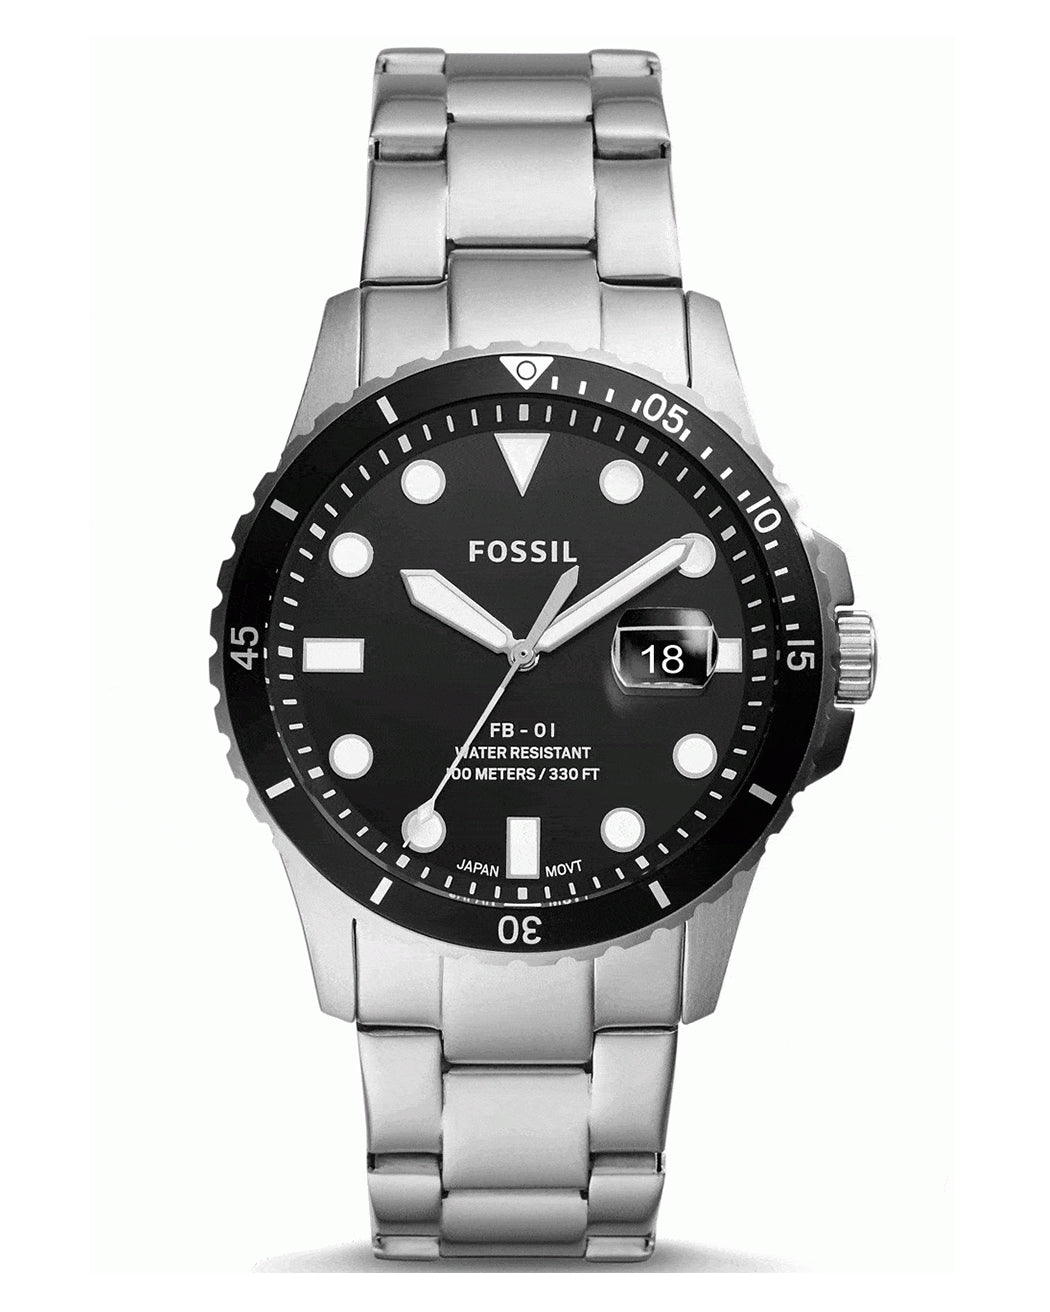 Fossil FB-01 Stainless Steel Black Dial Mens Watch